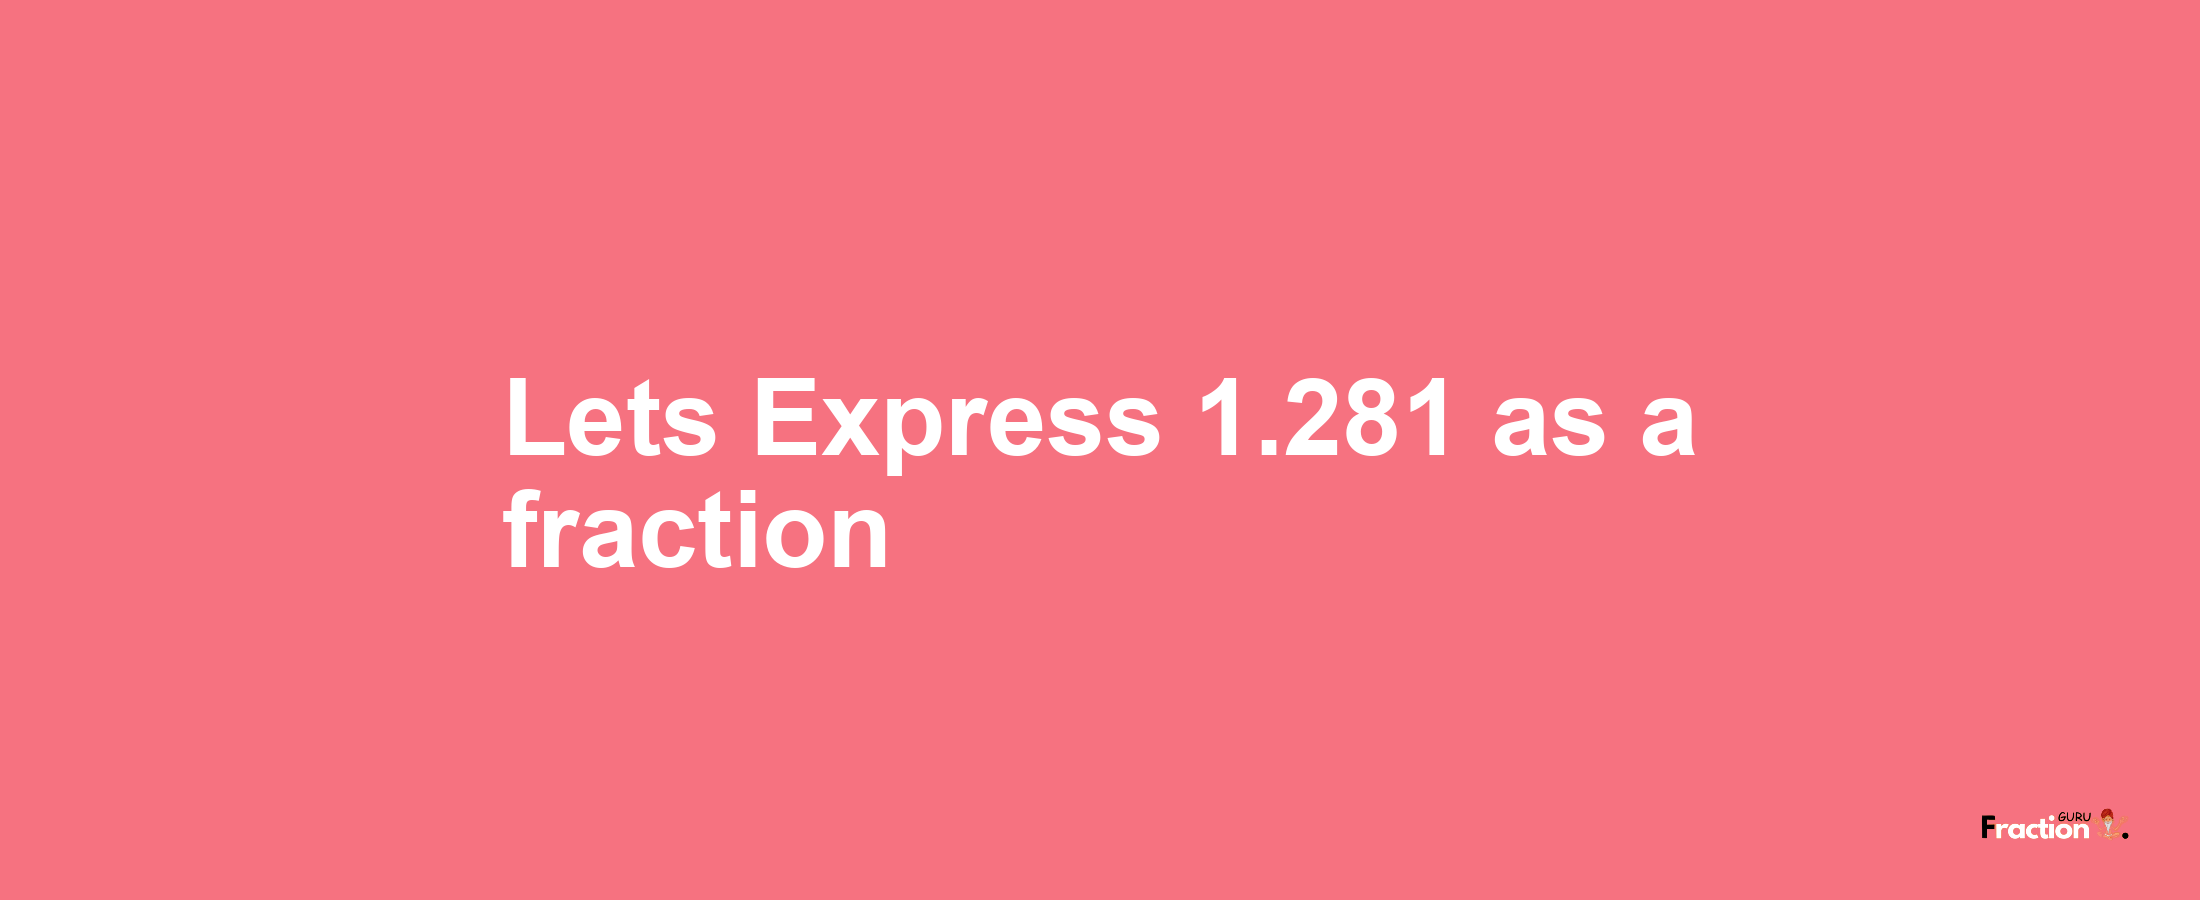 Lets Express 1.281 as afraction